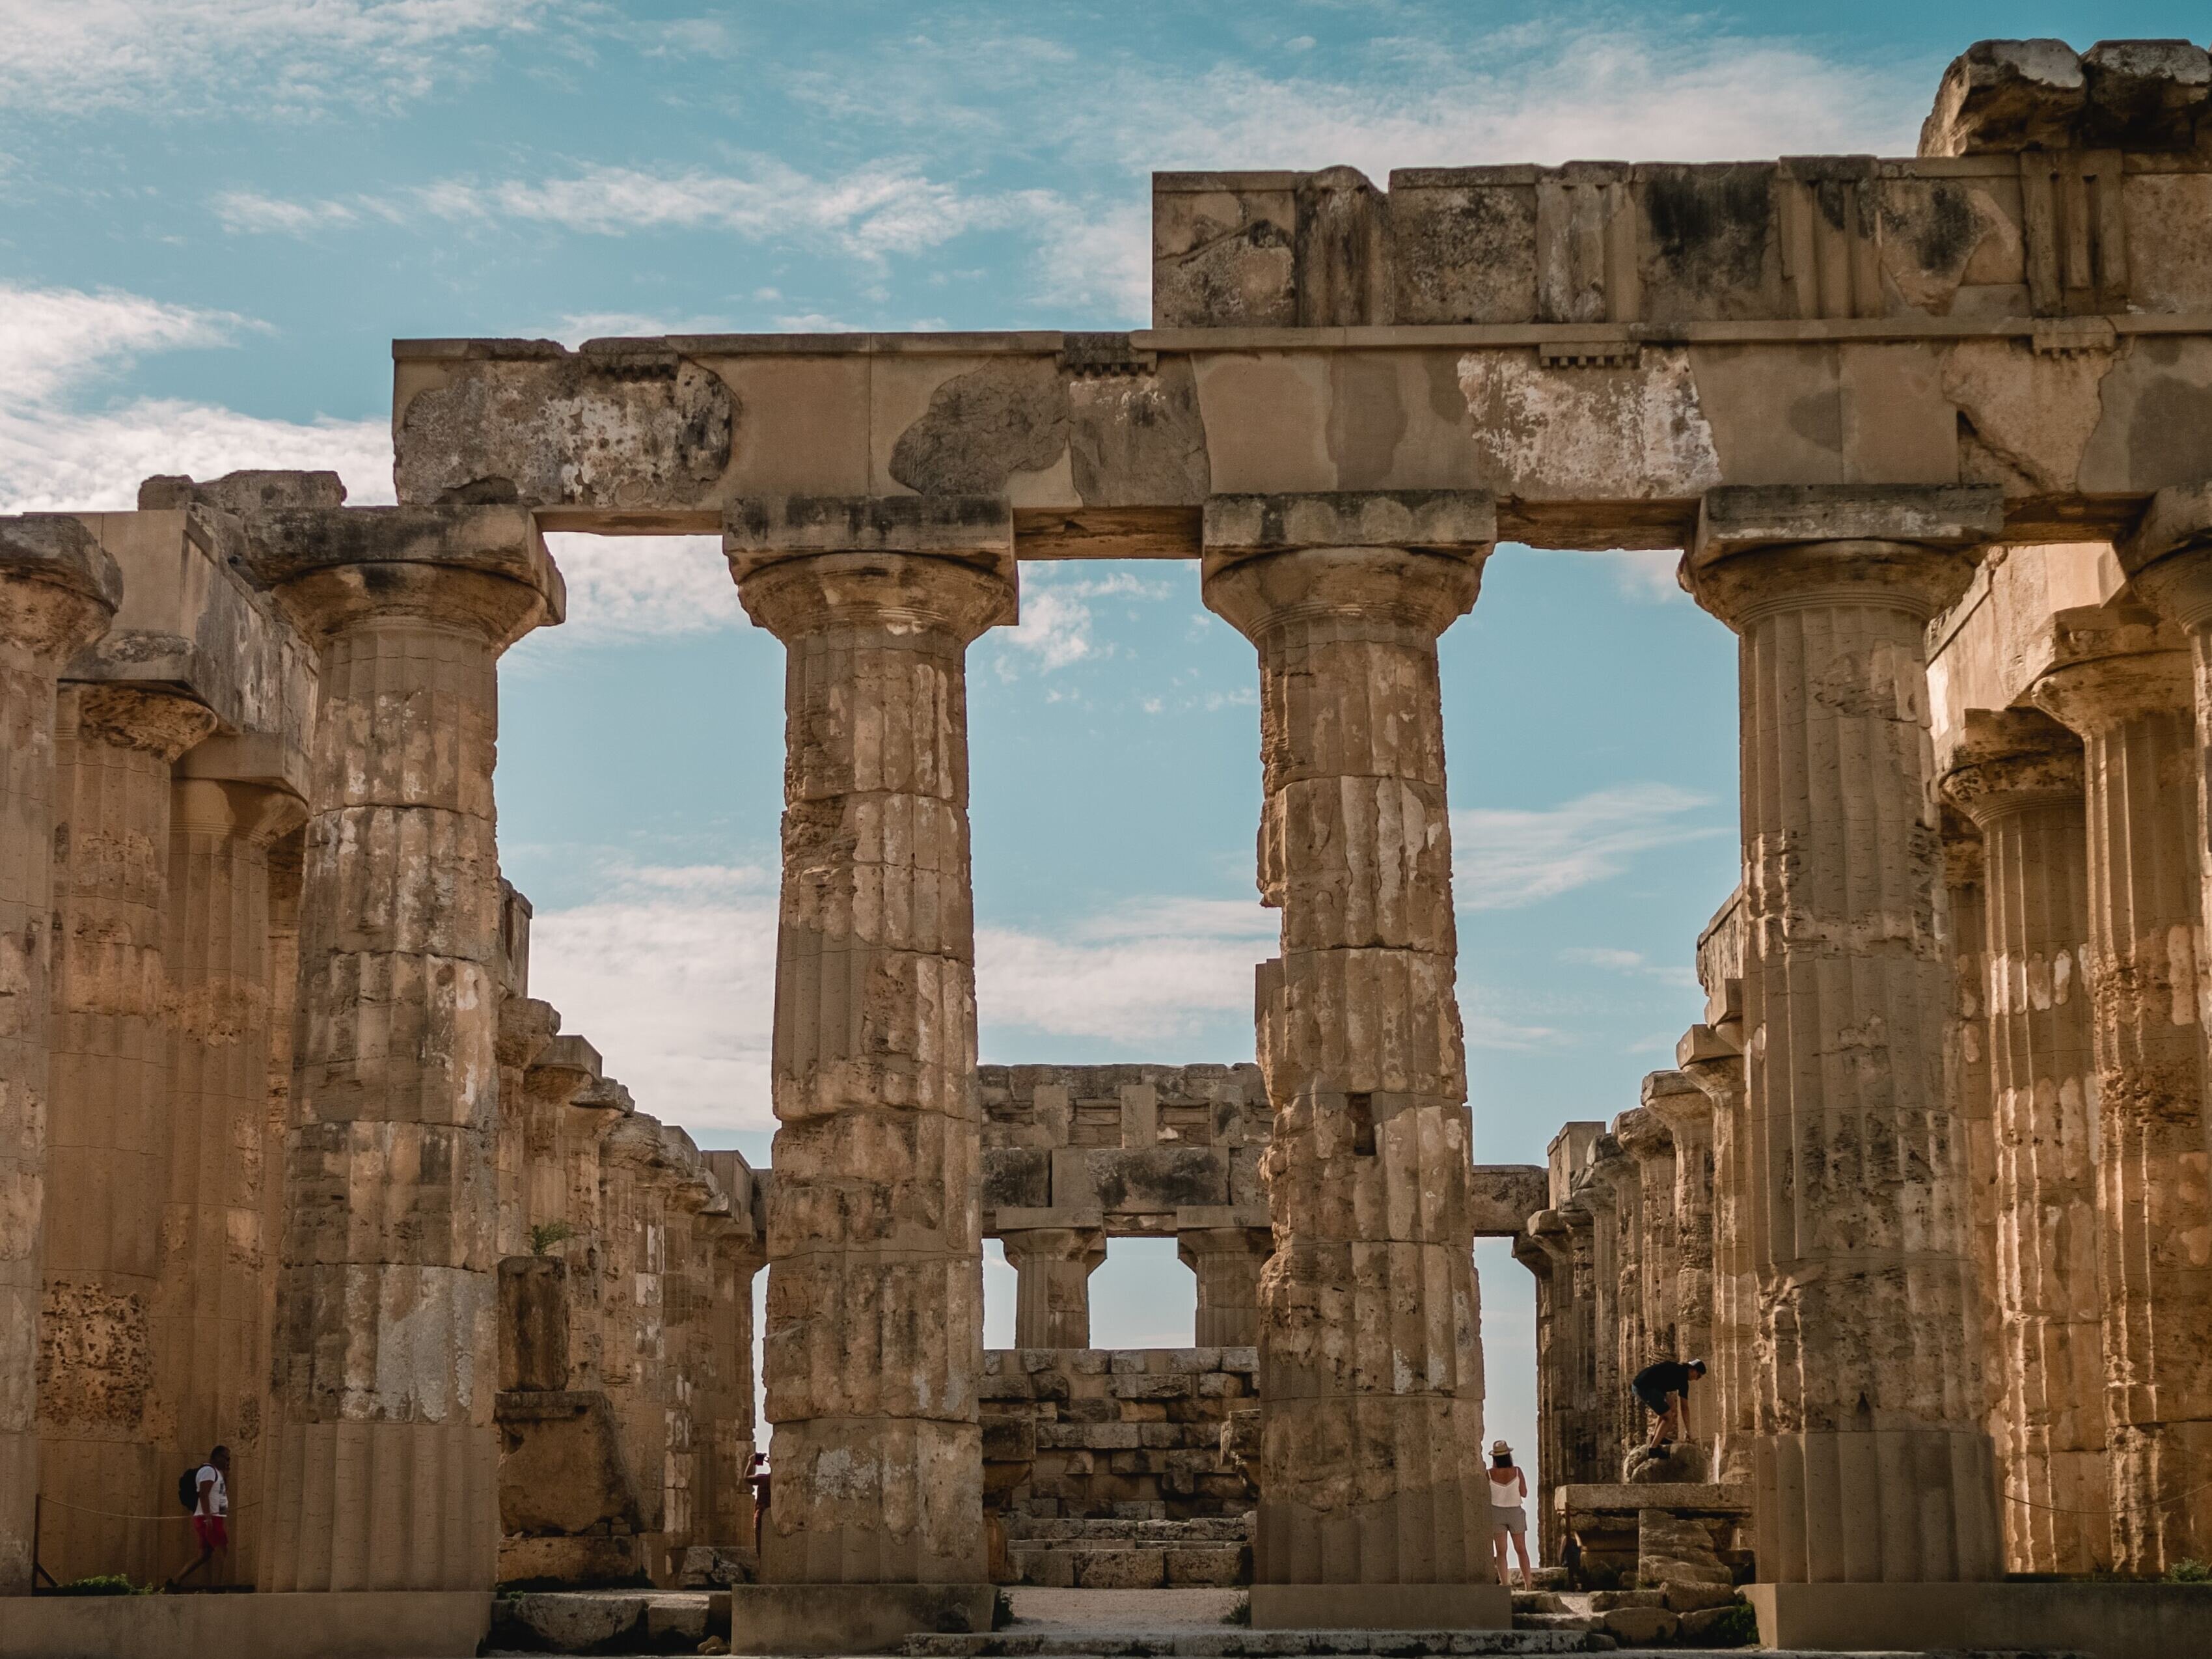 Ancient Greece and Rome